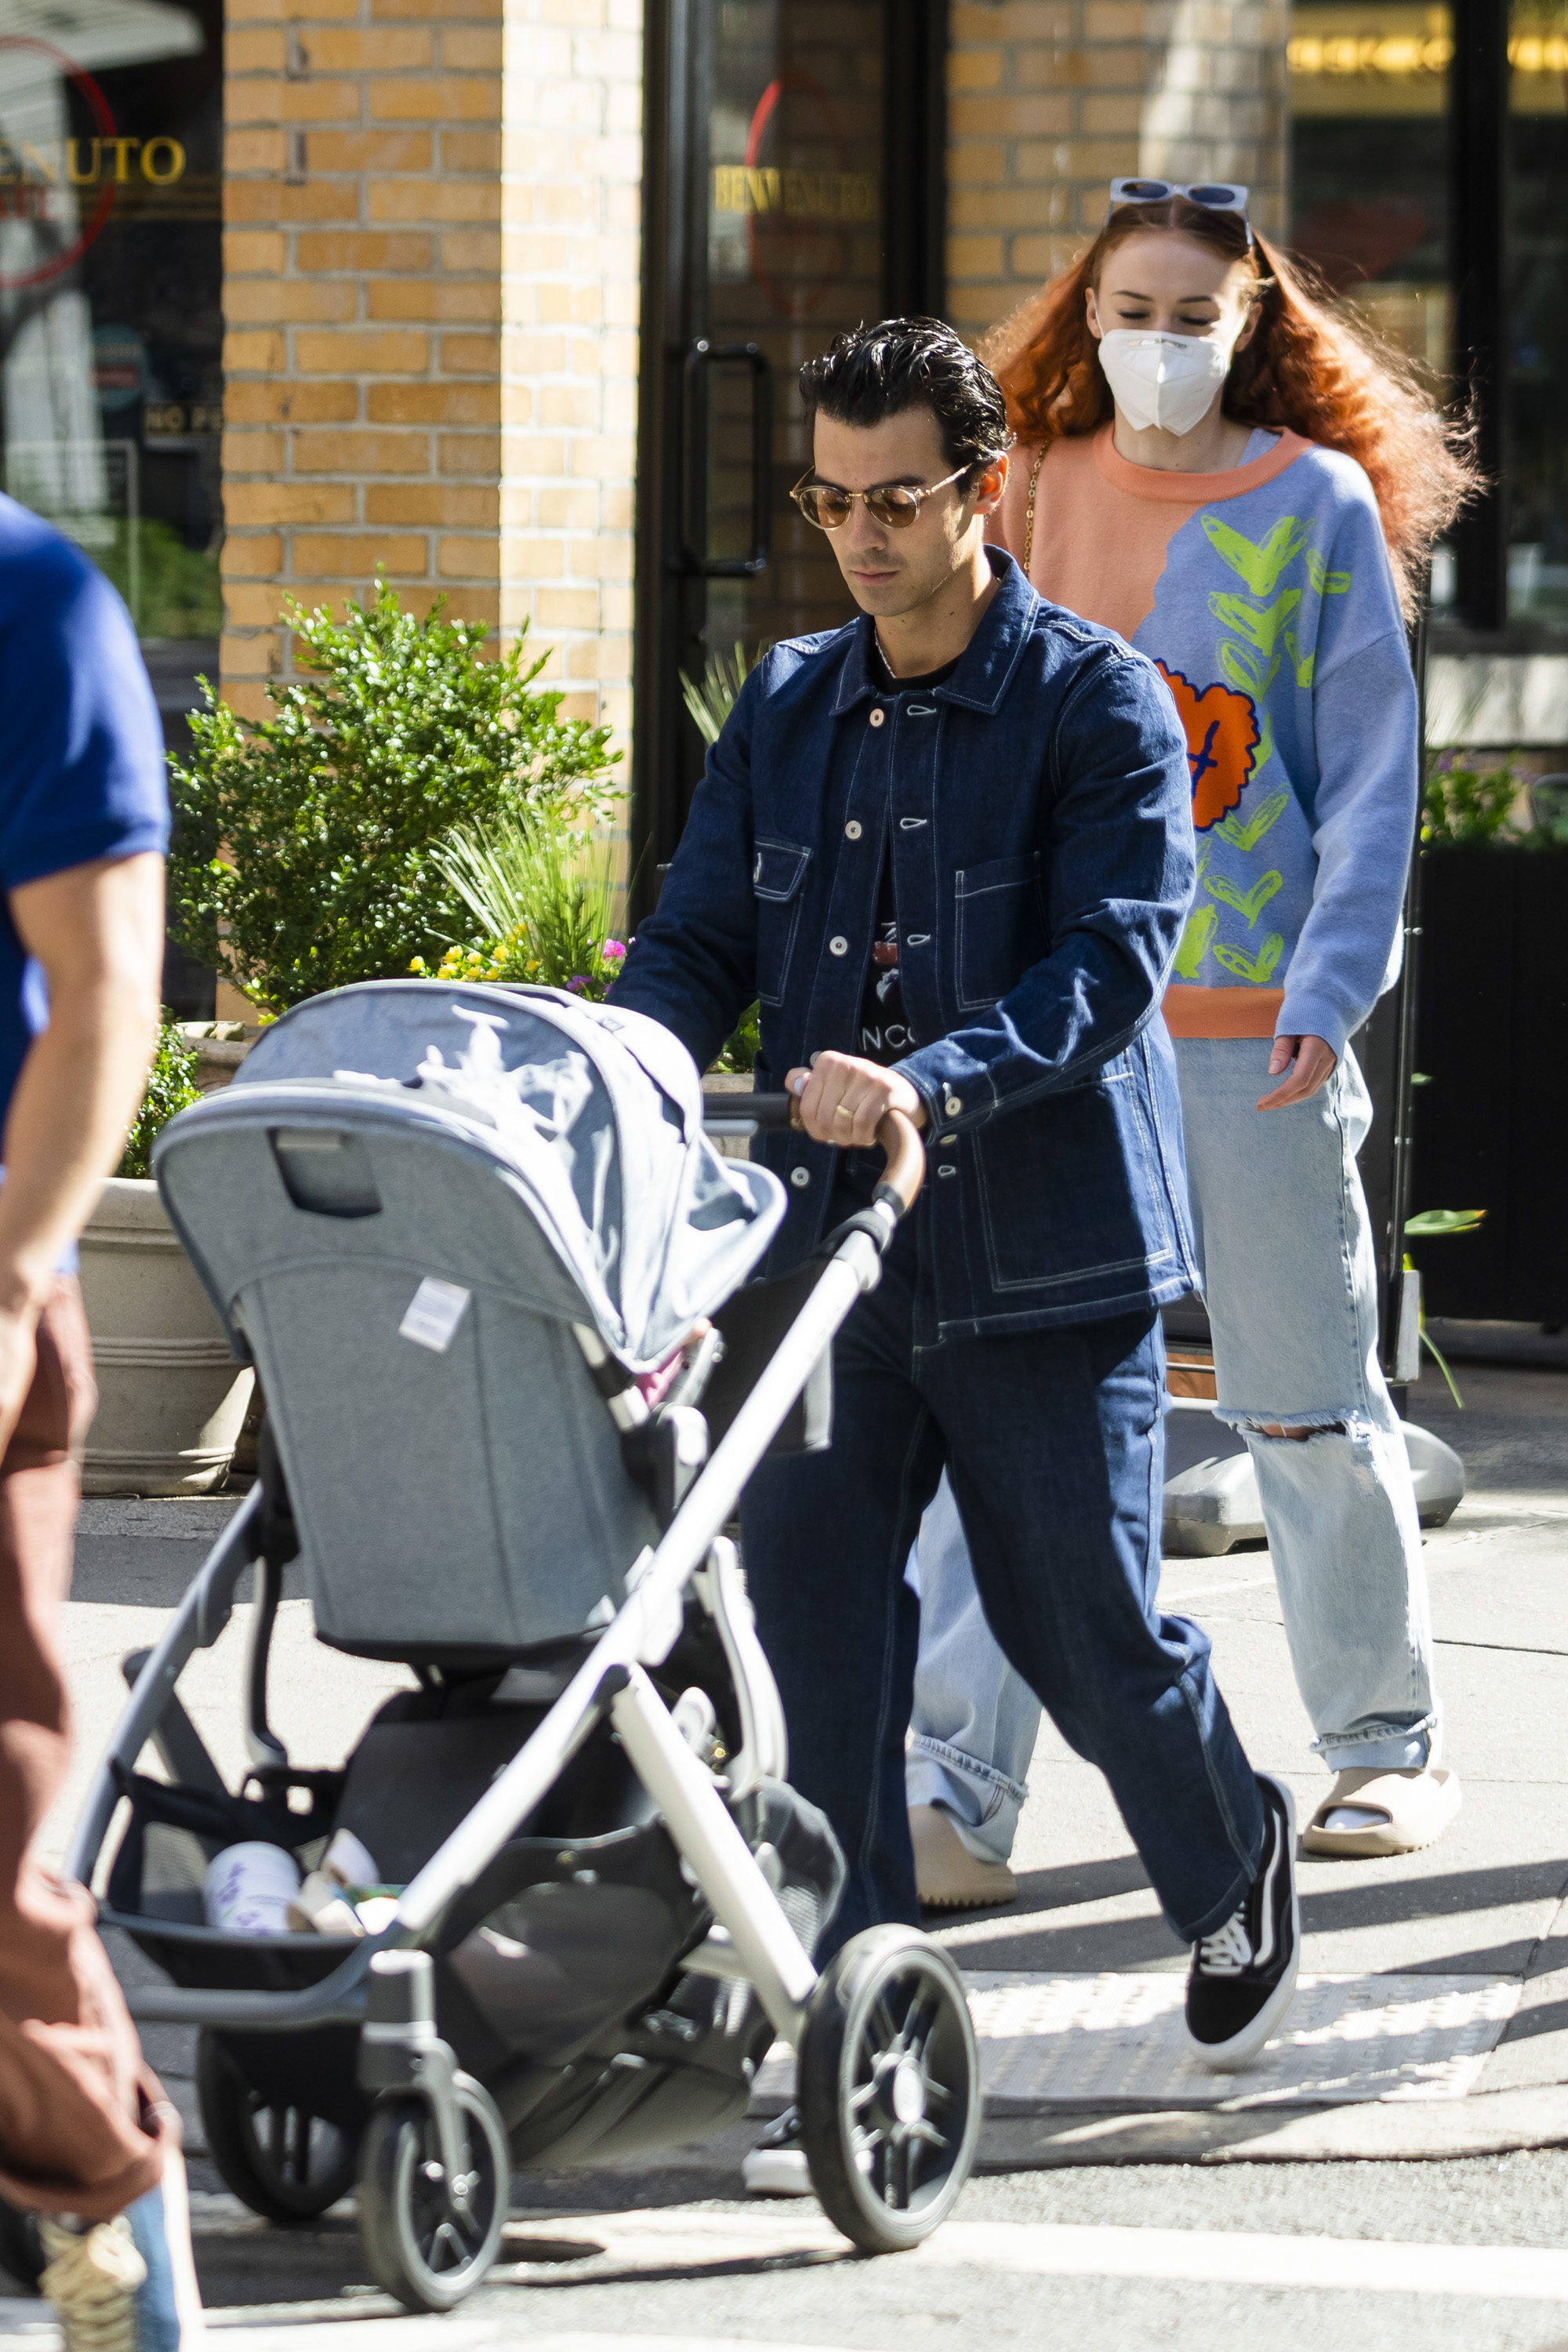 Joe in denim jacket and sunglasses pushes a stroller on city sidewalk as Sophie, who&#x27;s wearing a patterned sweater, follows